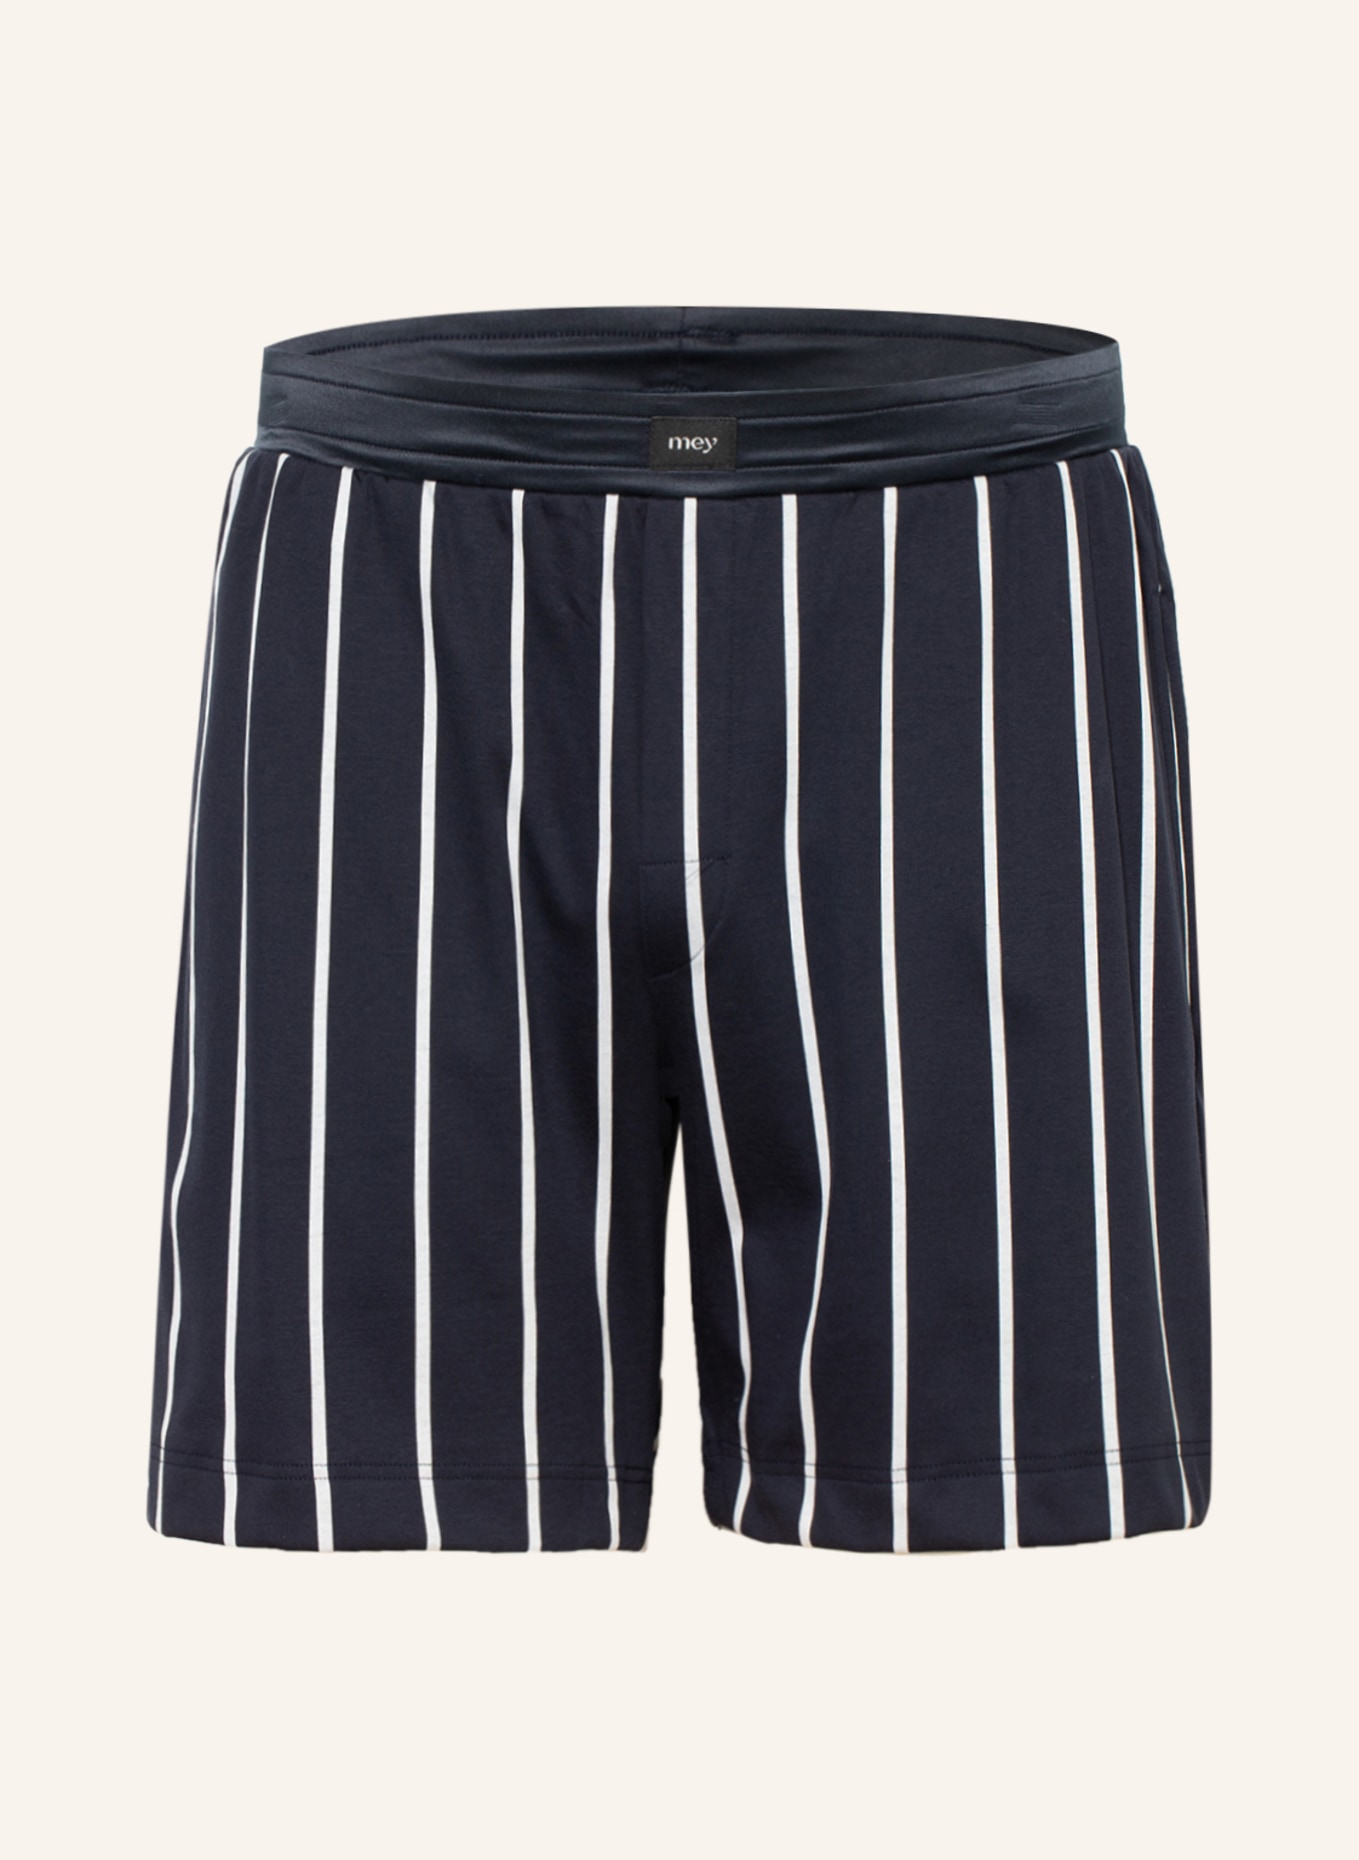 mey Lounge-Shorts Serie VALSTED, Farbe: BLAU/ WEISS (Bild 1)